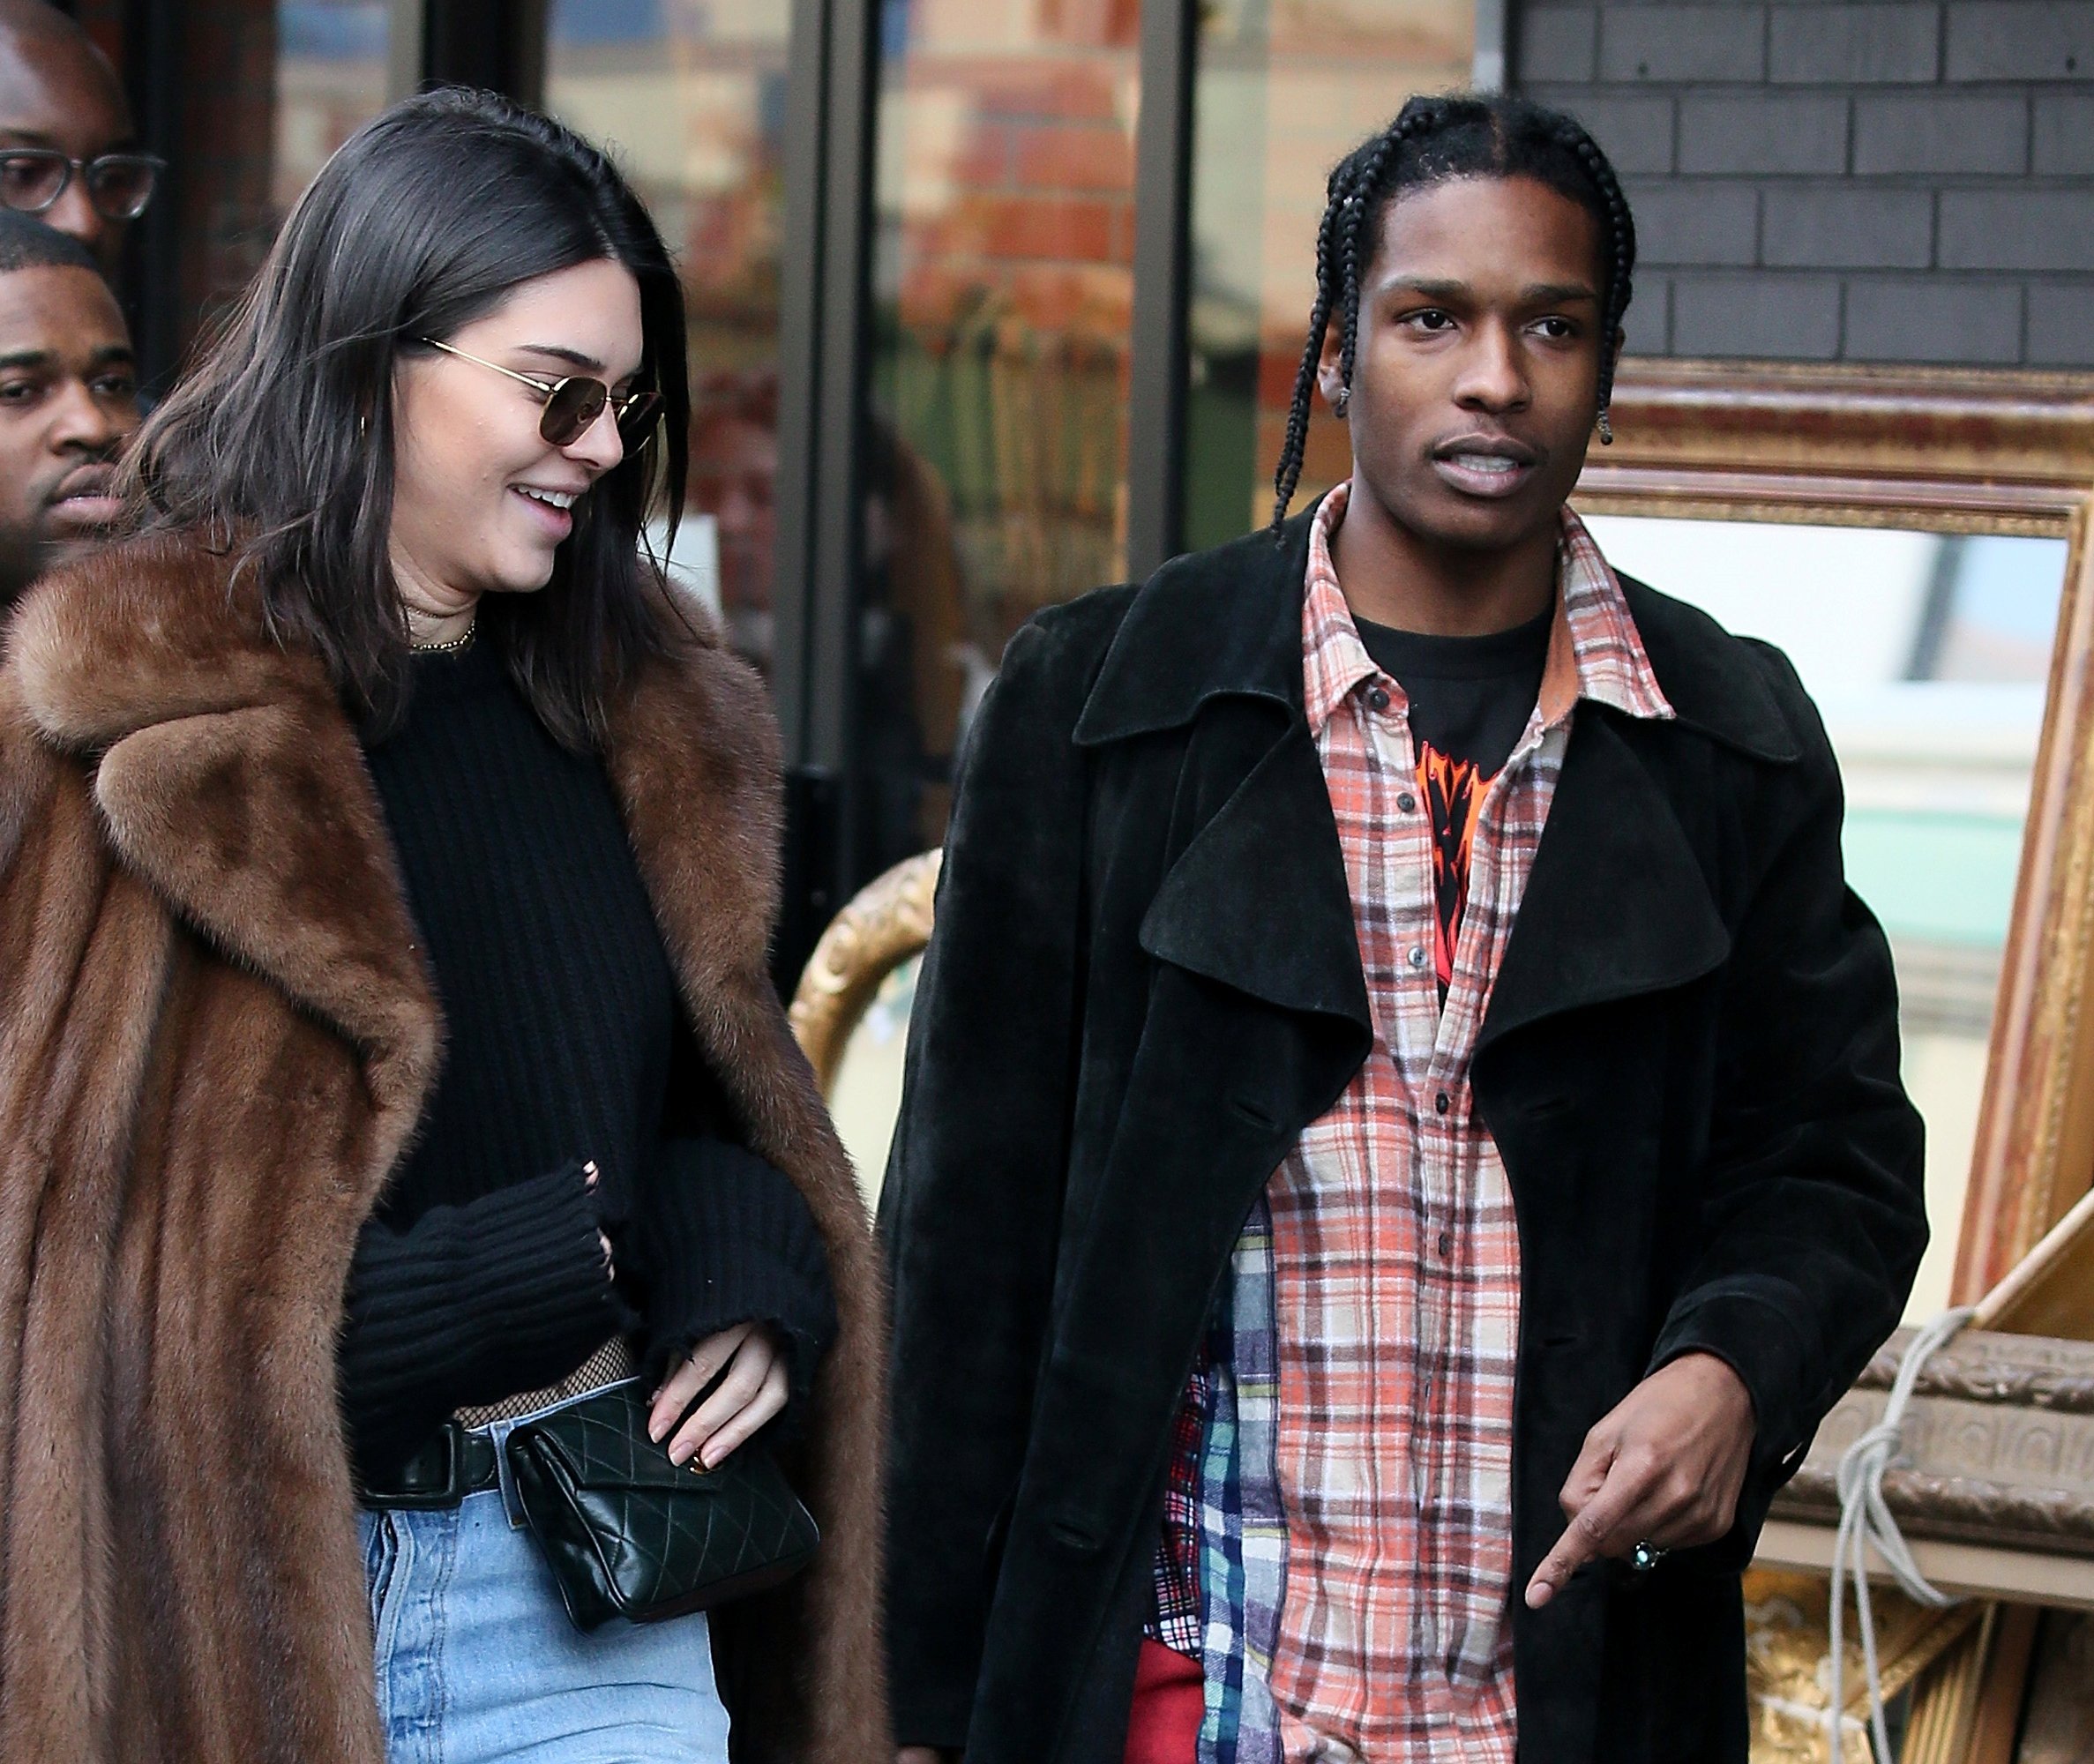 Kendall Jenner and A$AP Rocky at a flea market together in 2017